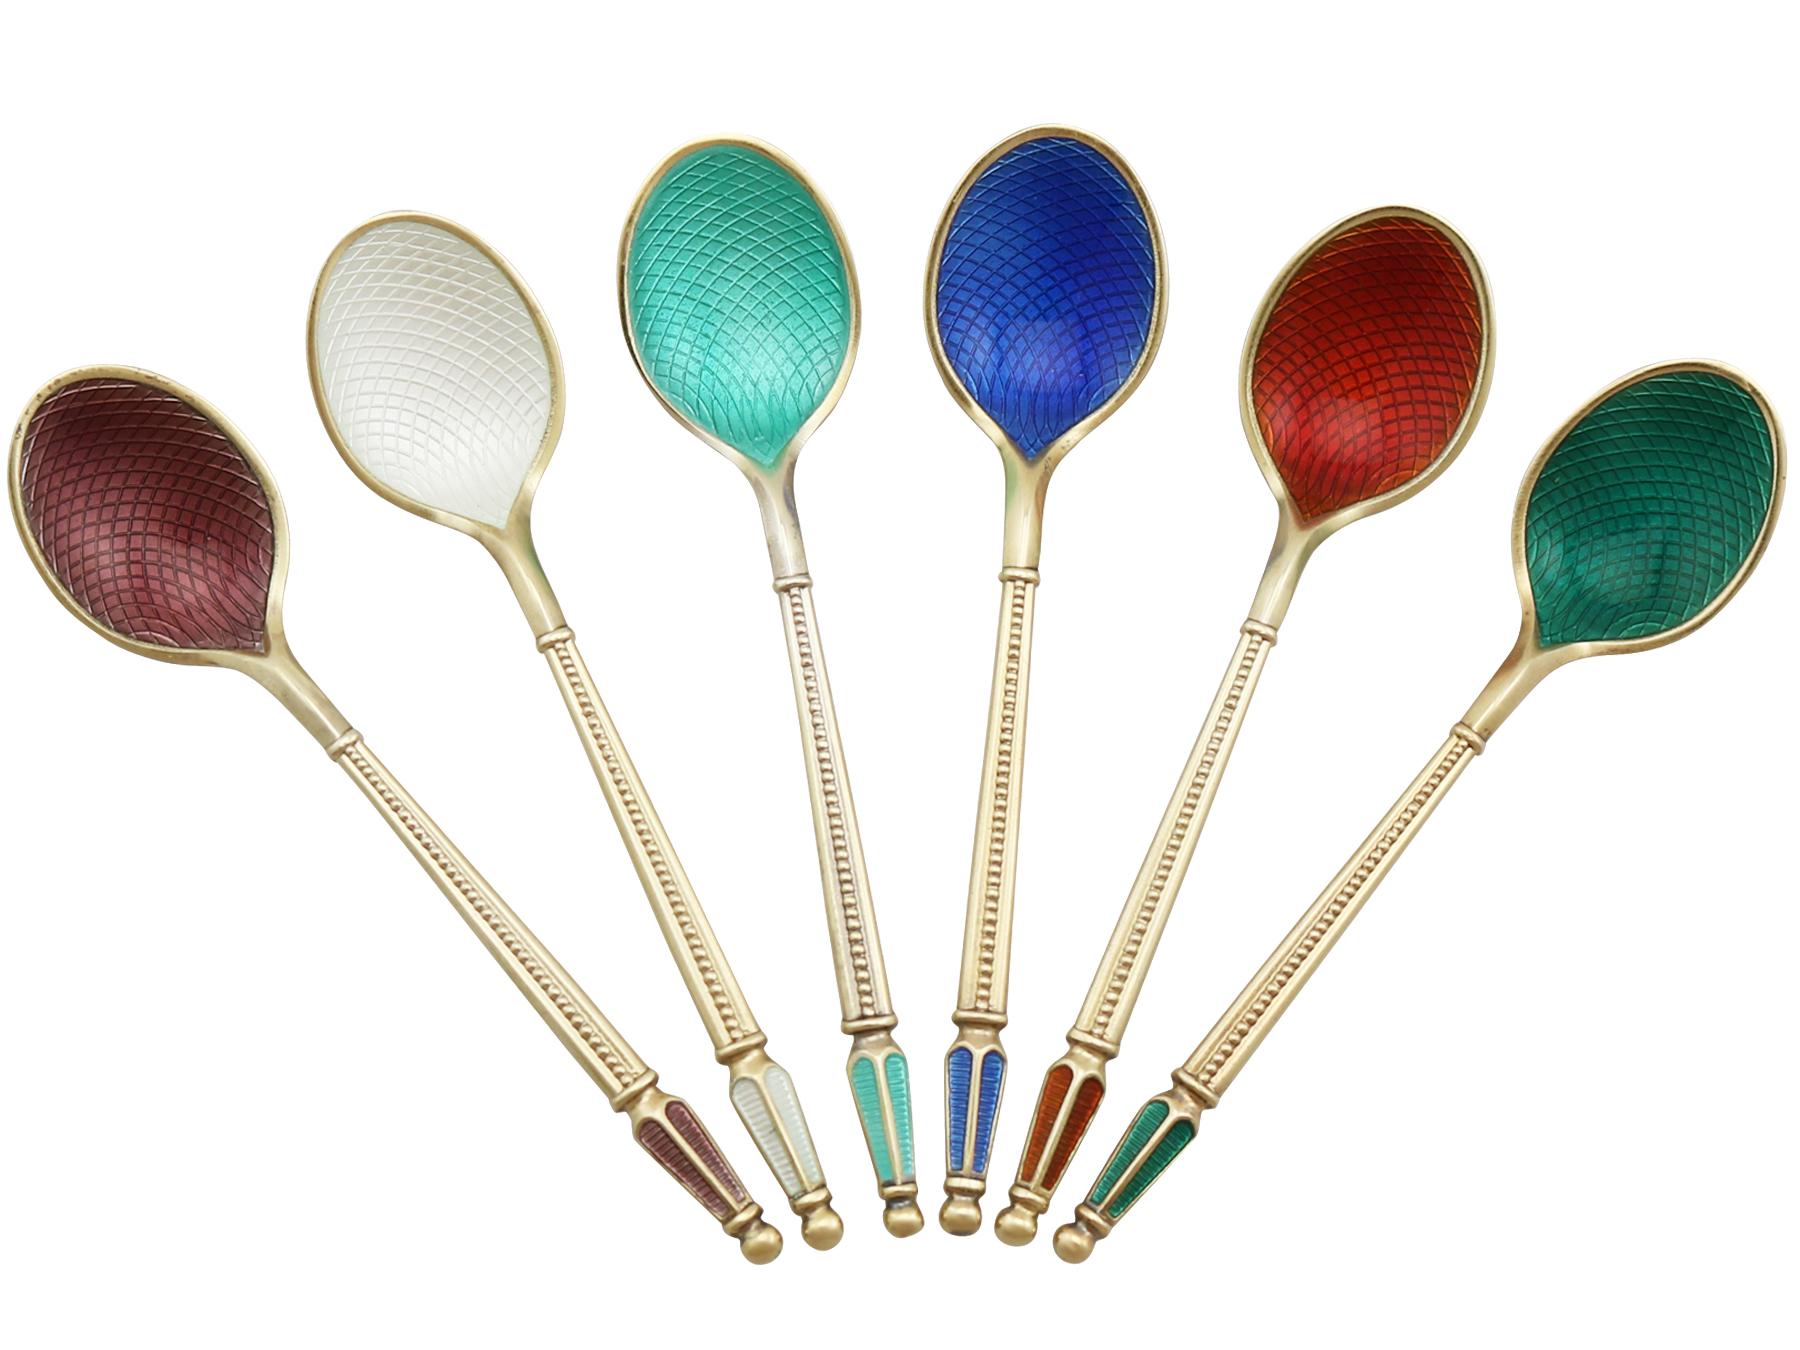 An exceptional, fine and impressive set of six antique Danish sterling silver gilt and enamel spoons - boxed; an addition to our silver teaware collection.

These exceptional vintage Danish sterling silver gilt coffee spoons have a plain rounded